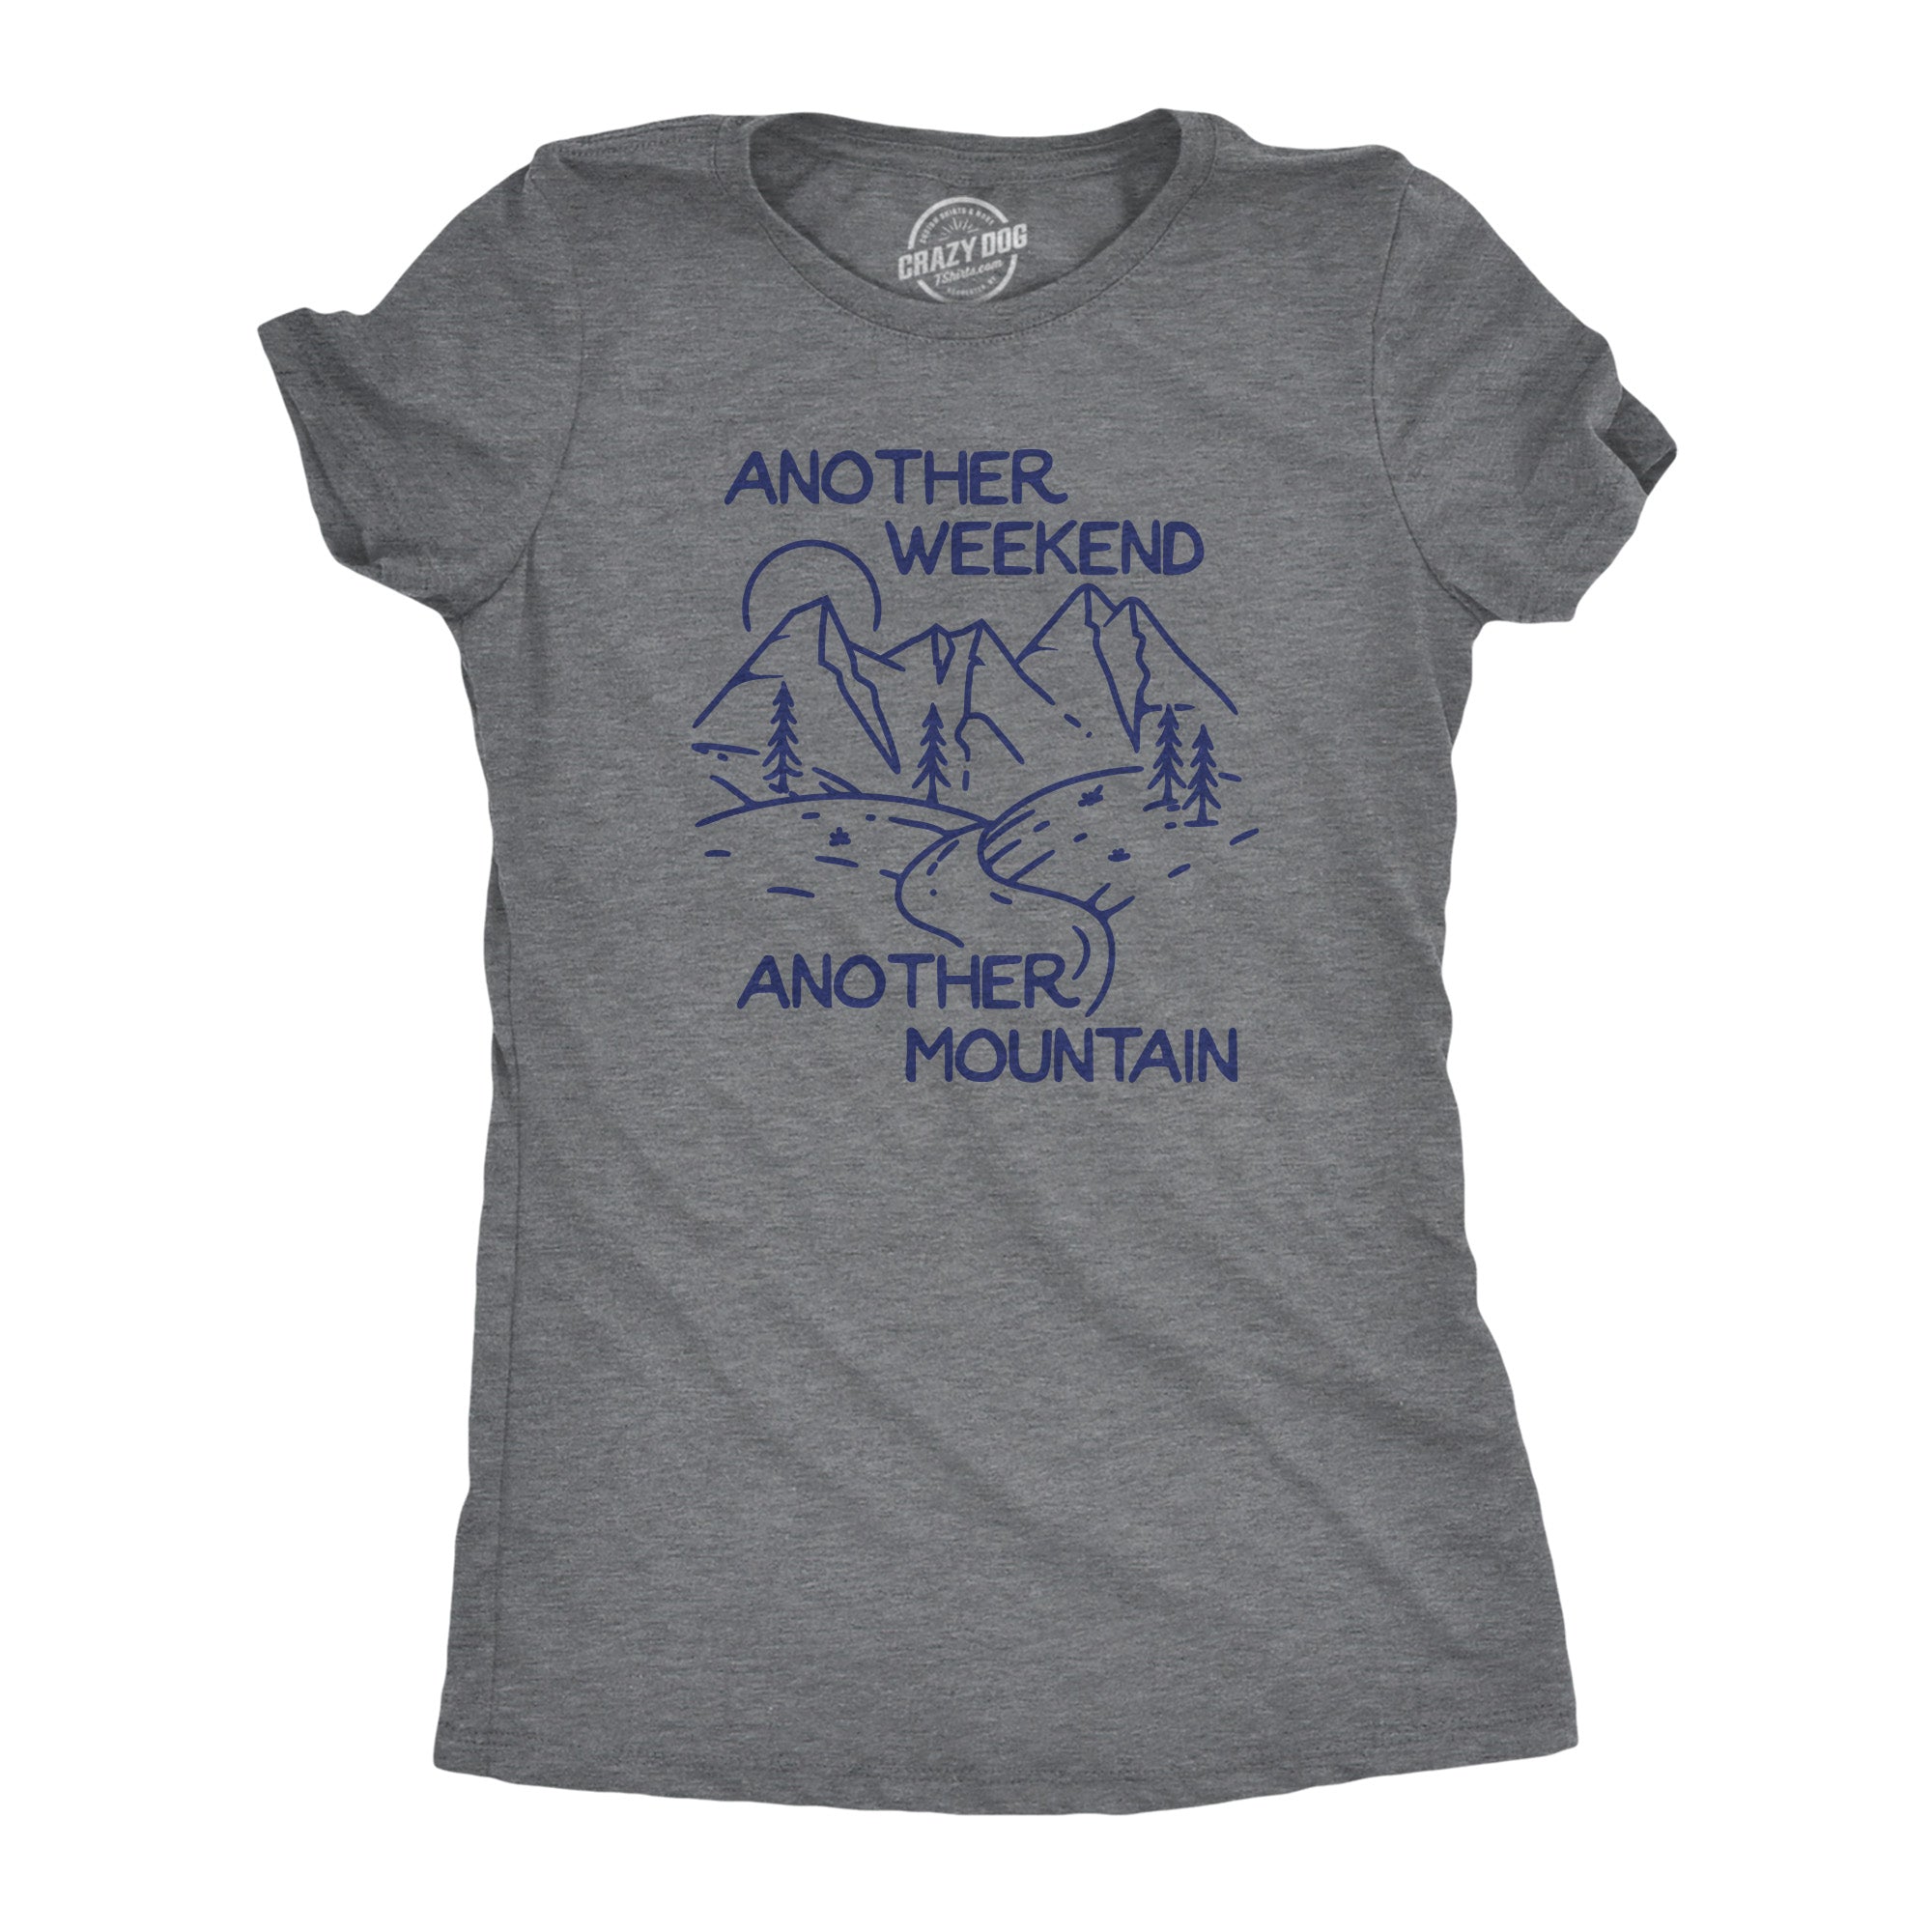 Funny Dark Heather Grey - WEEKEND Another Weekend Another Mountain Womens T Shirt Nerdy Camping Tee